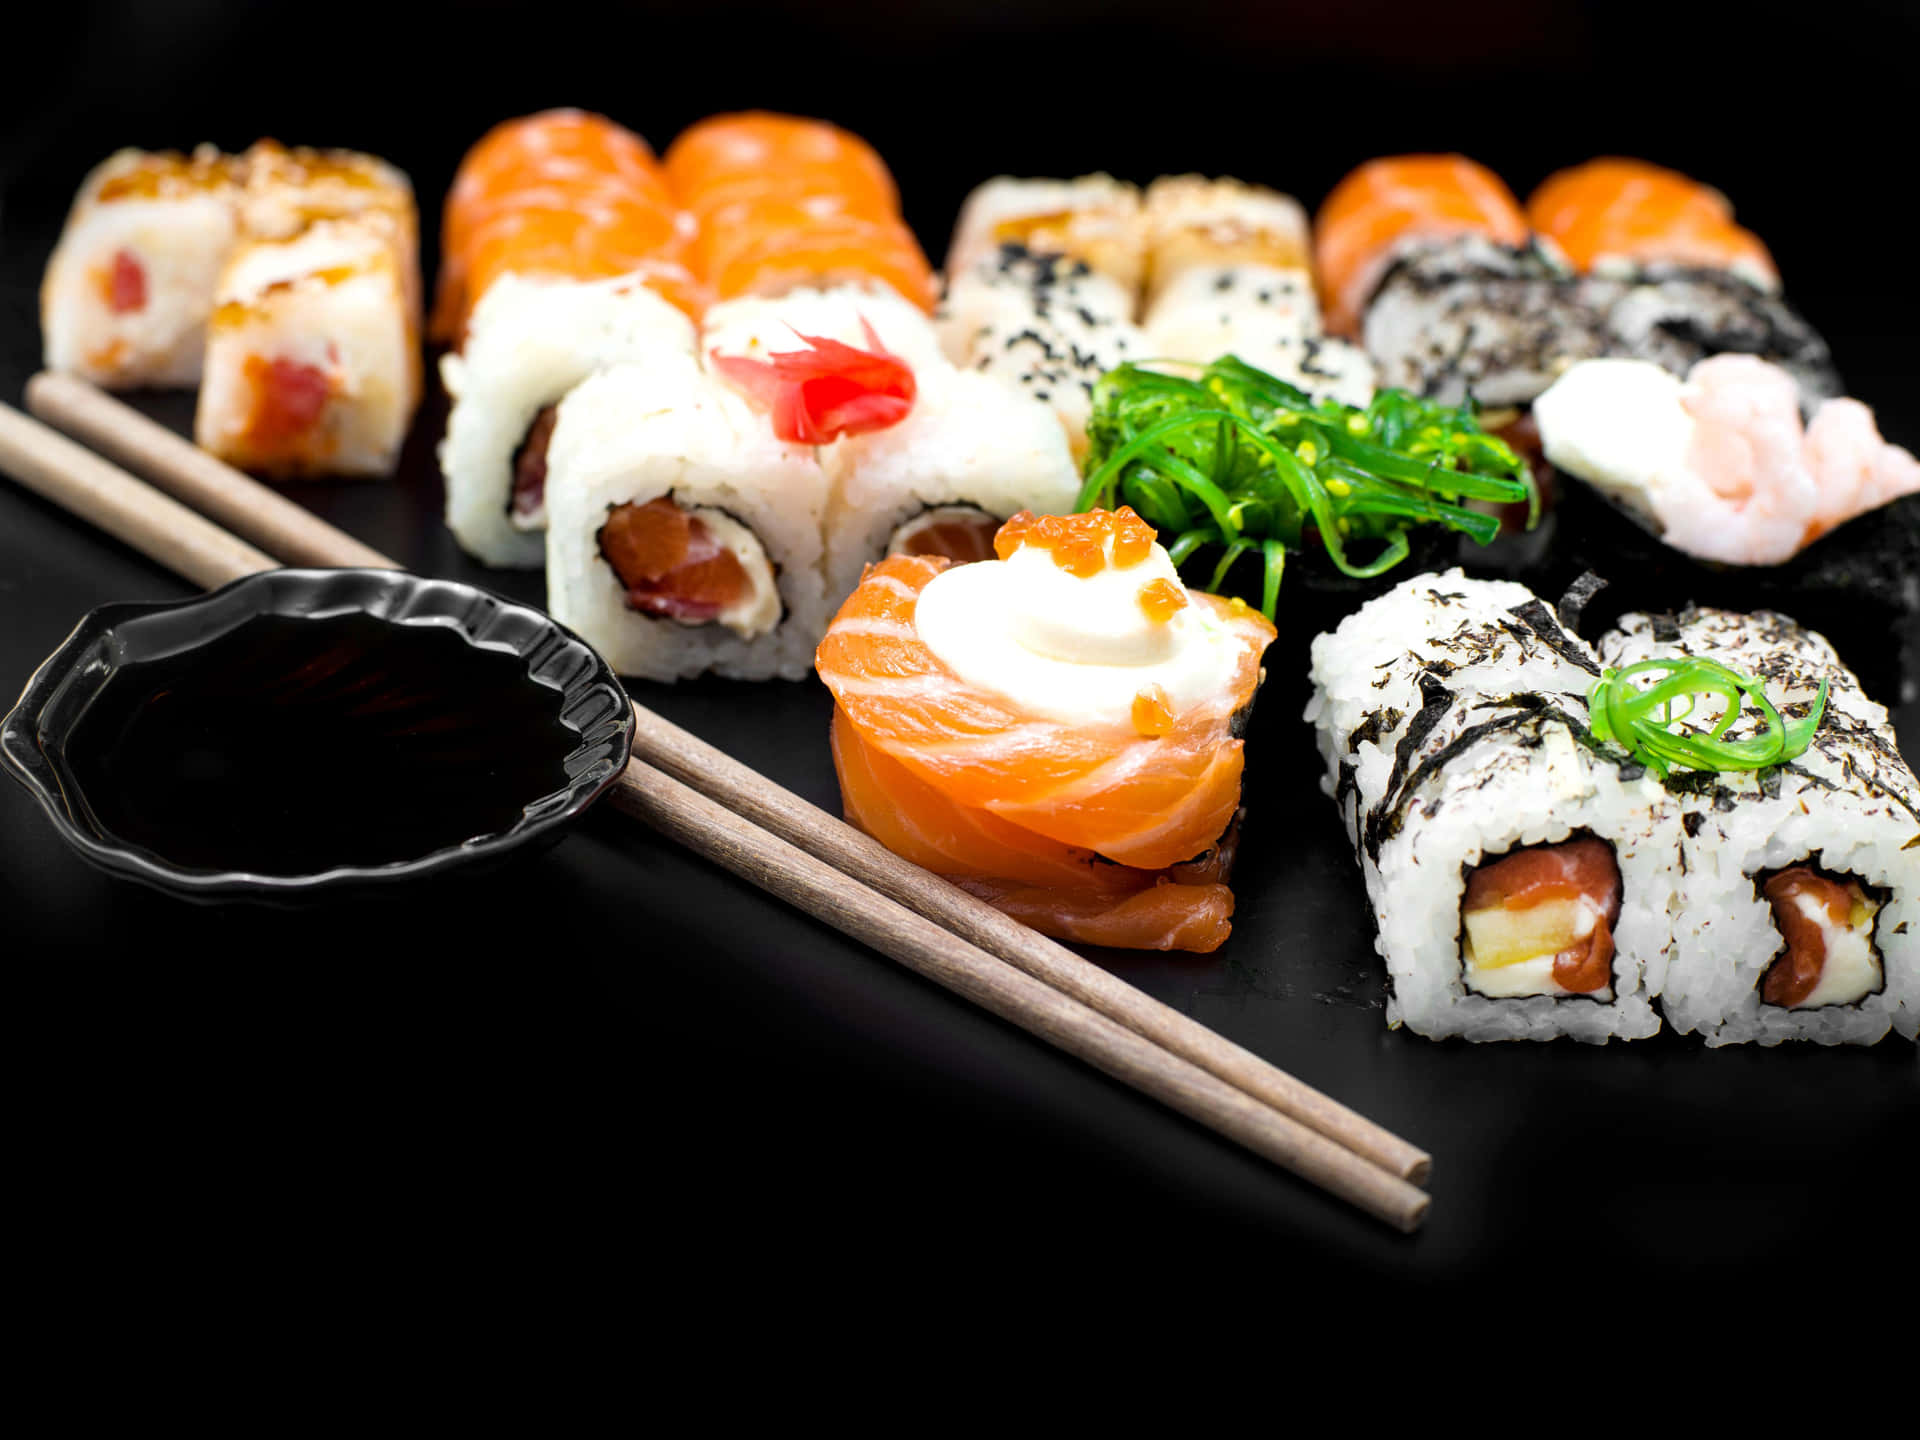 Delicious assortment of sushi on a wooden serving platter